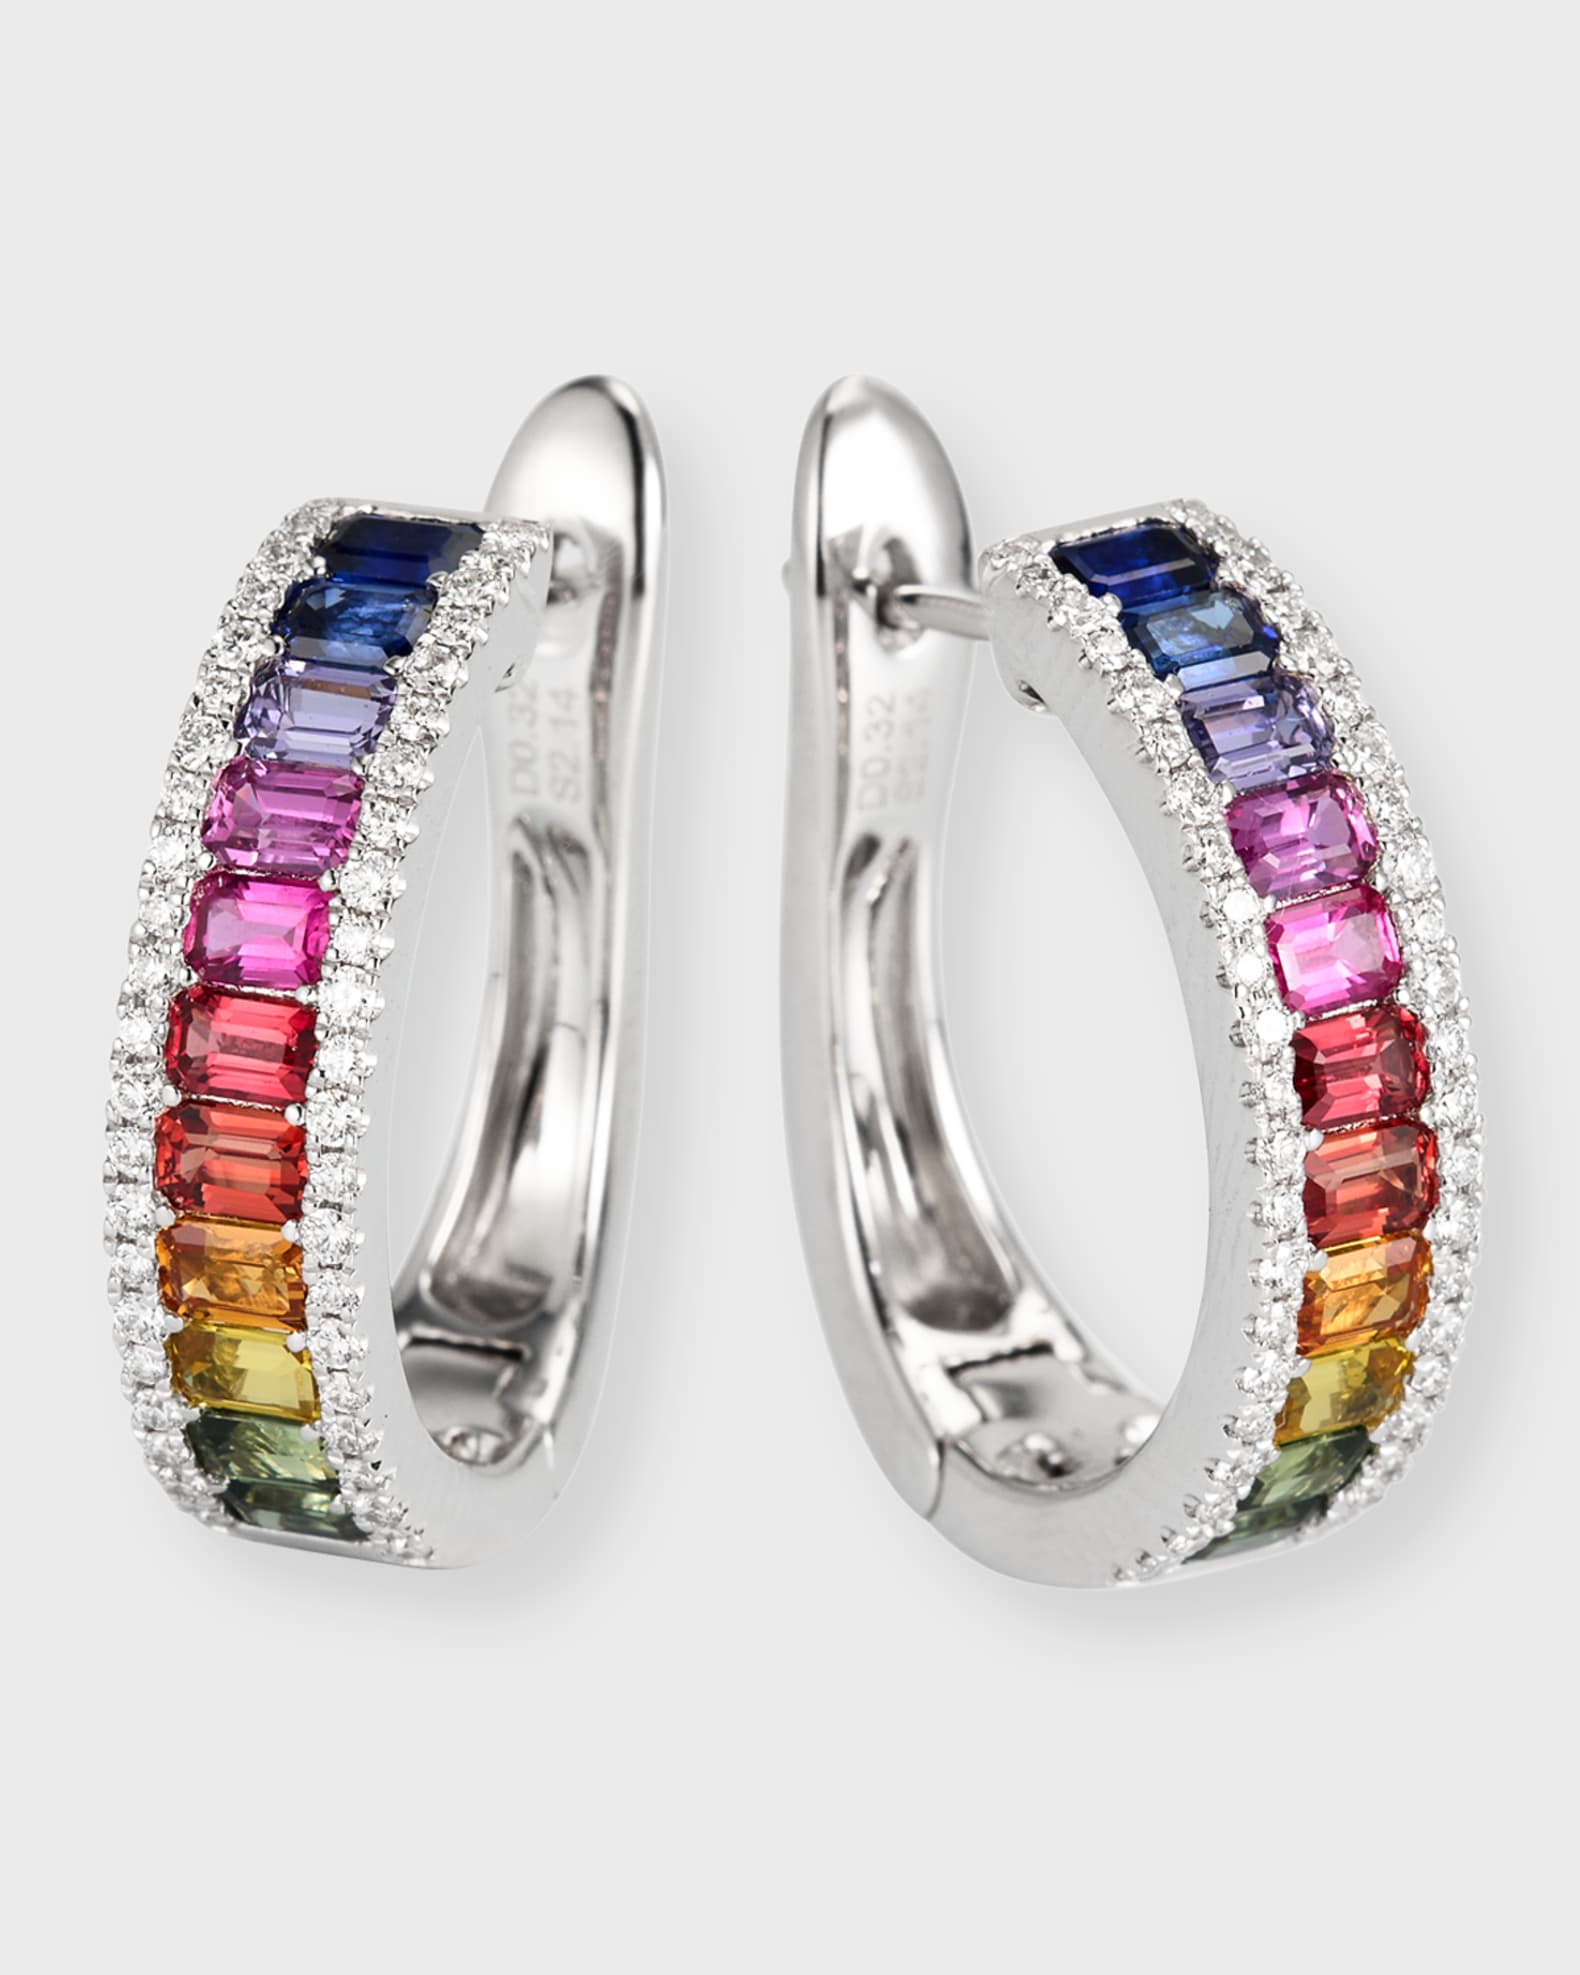 David Kord 18K White Gold Earrings with Multicolor Sapphires and ...